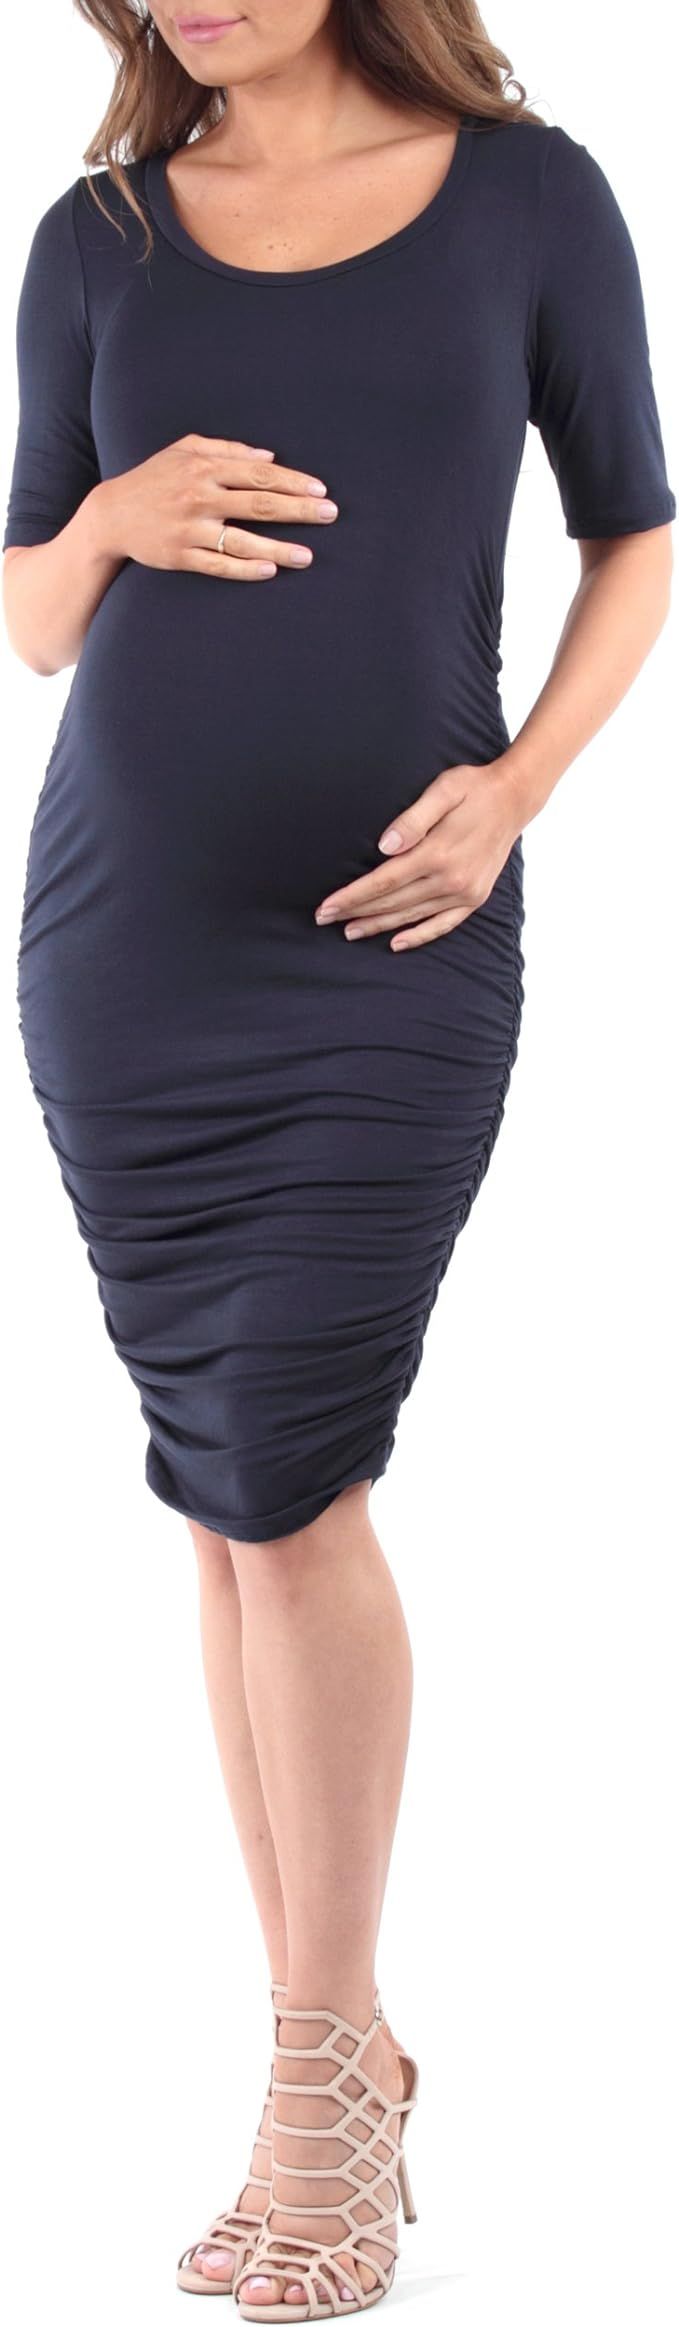 Women's Super Soft Maternity Dress by Mother bee - Made in USA | Amazon (US)